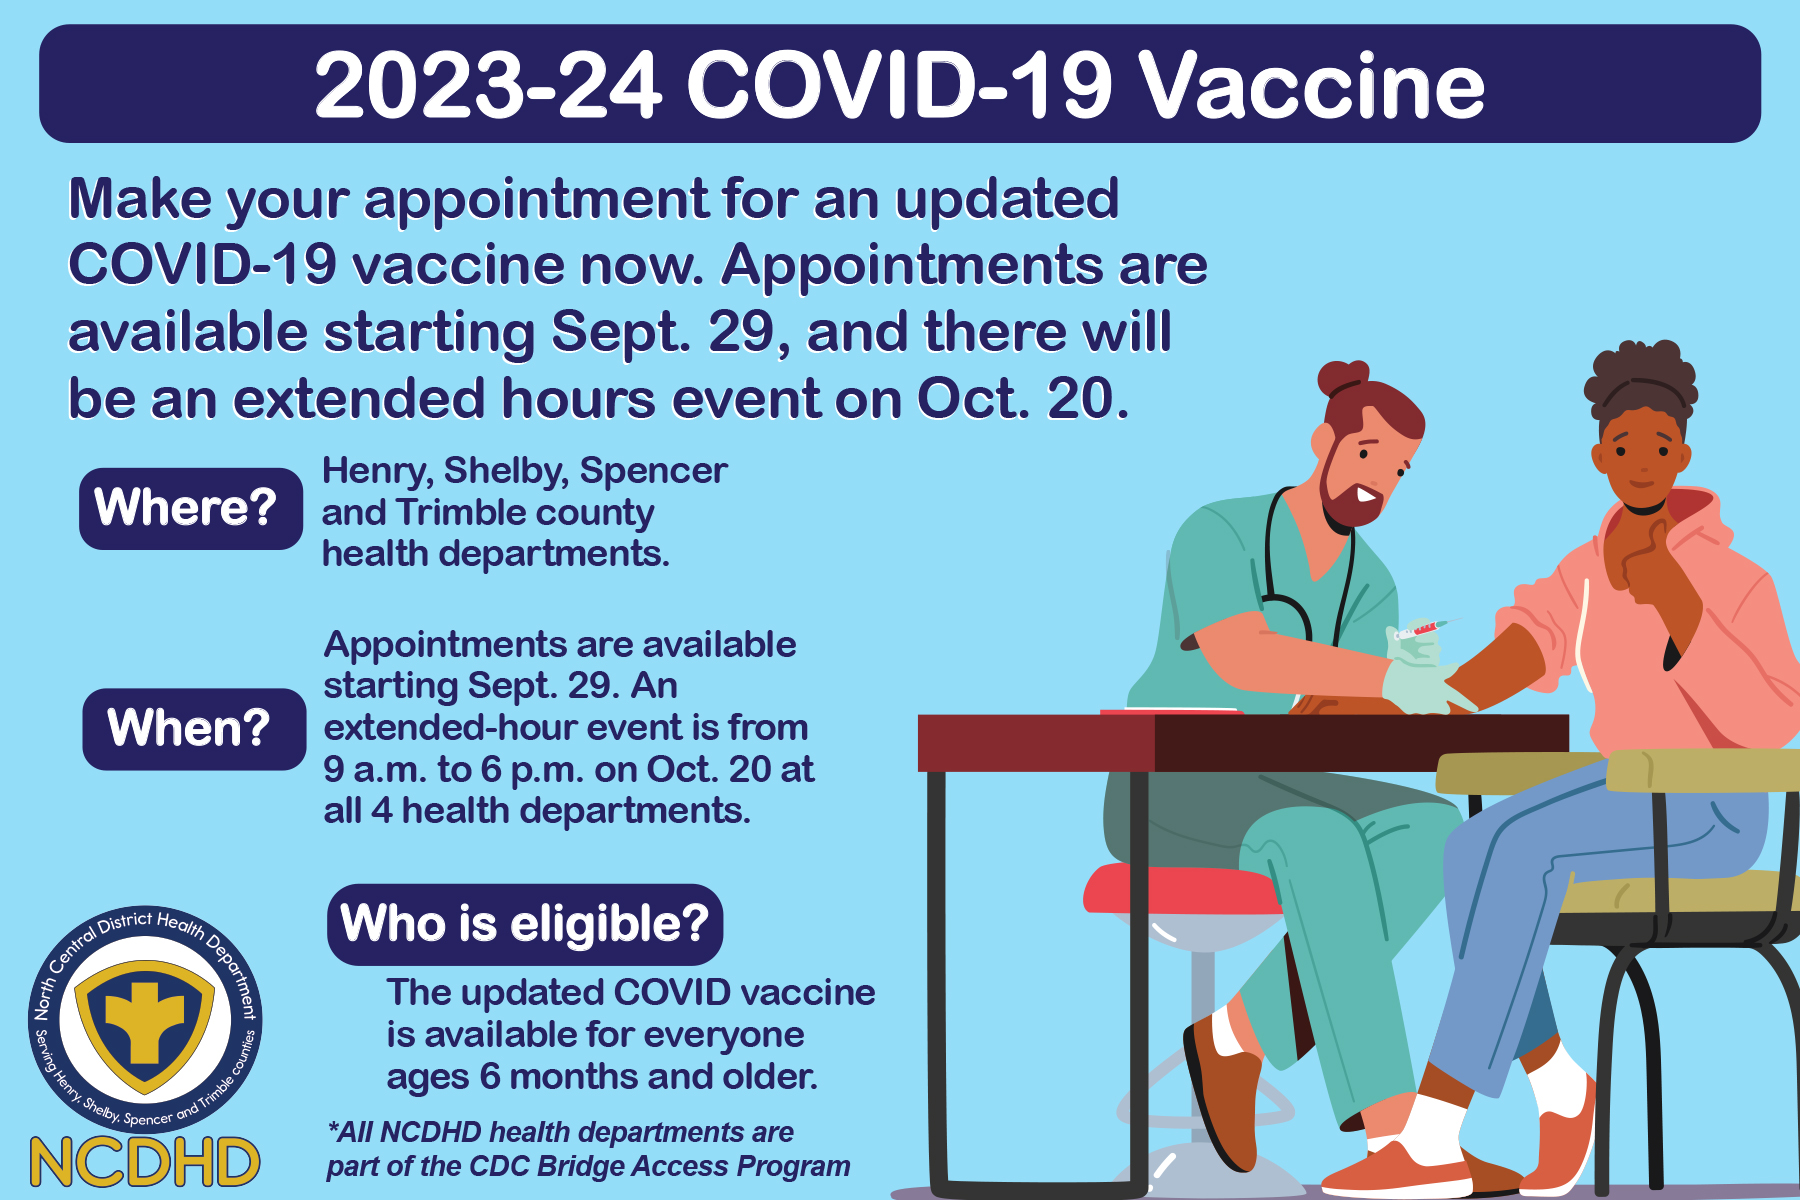 North Central District has updated COVID-19 vaccine available